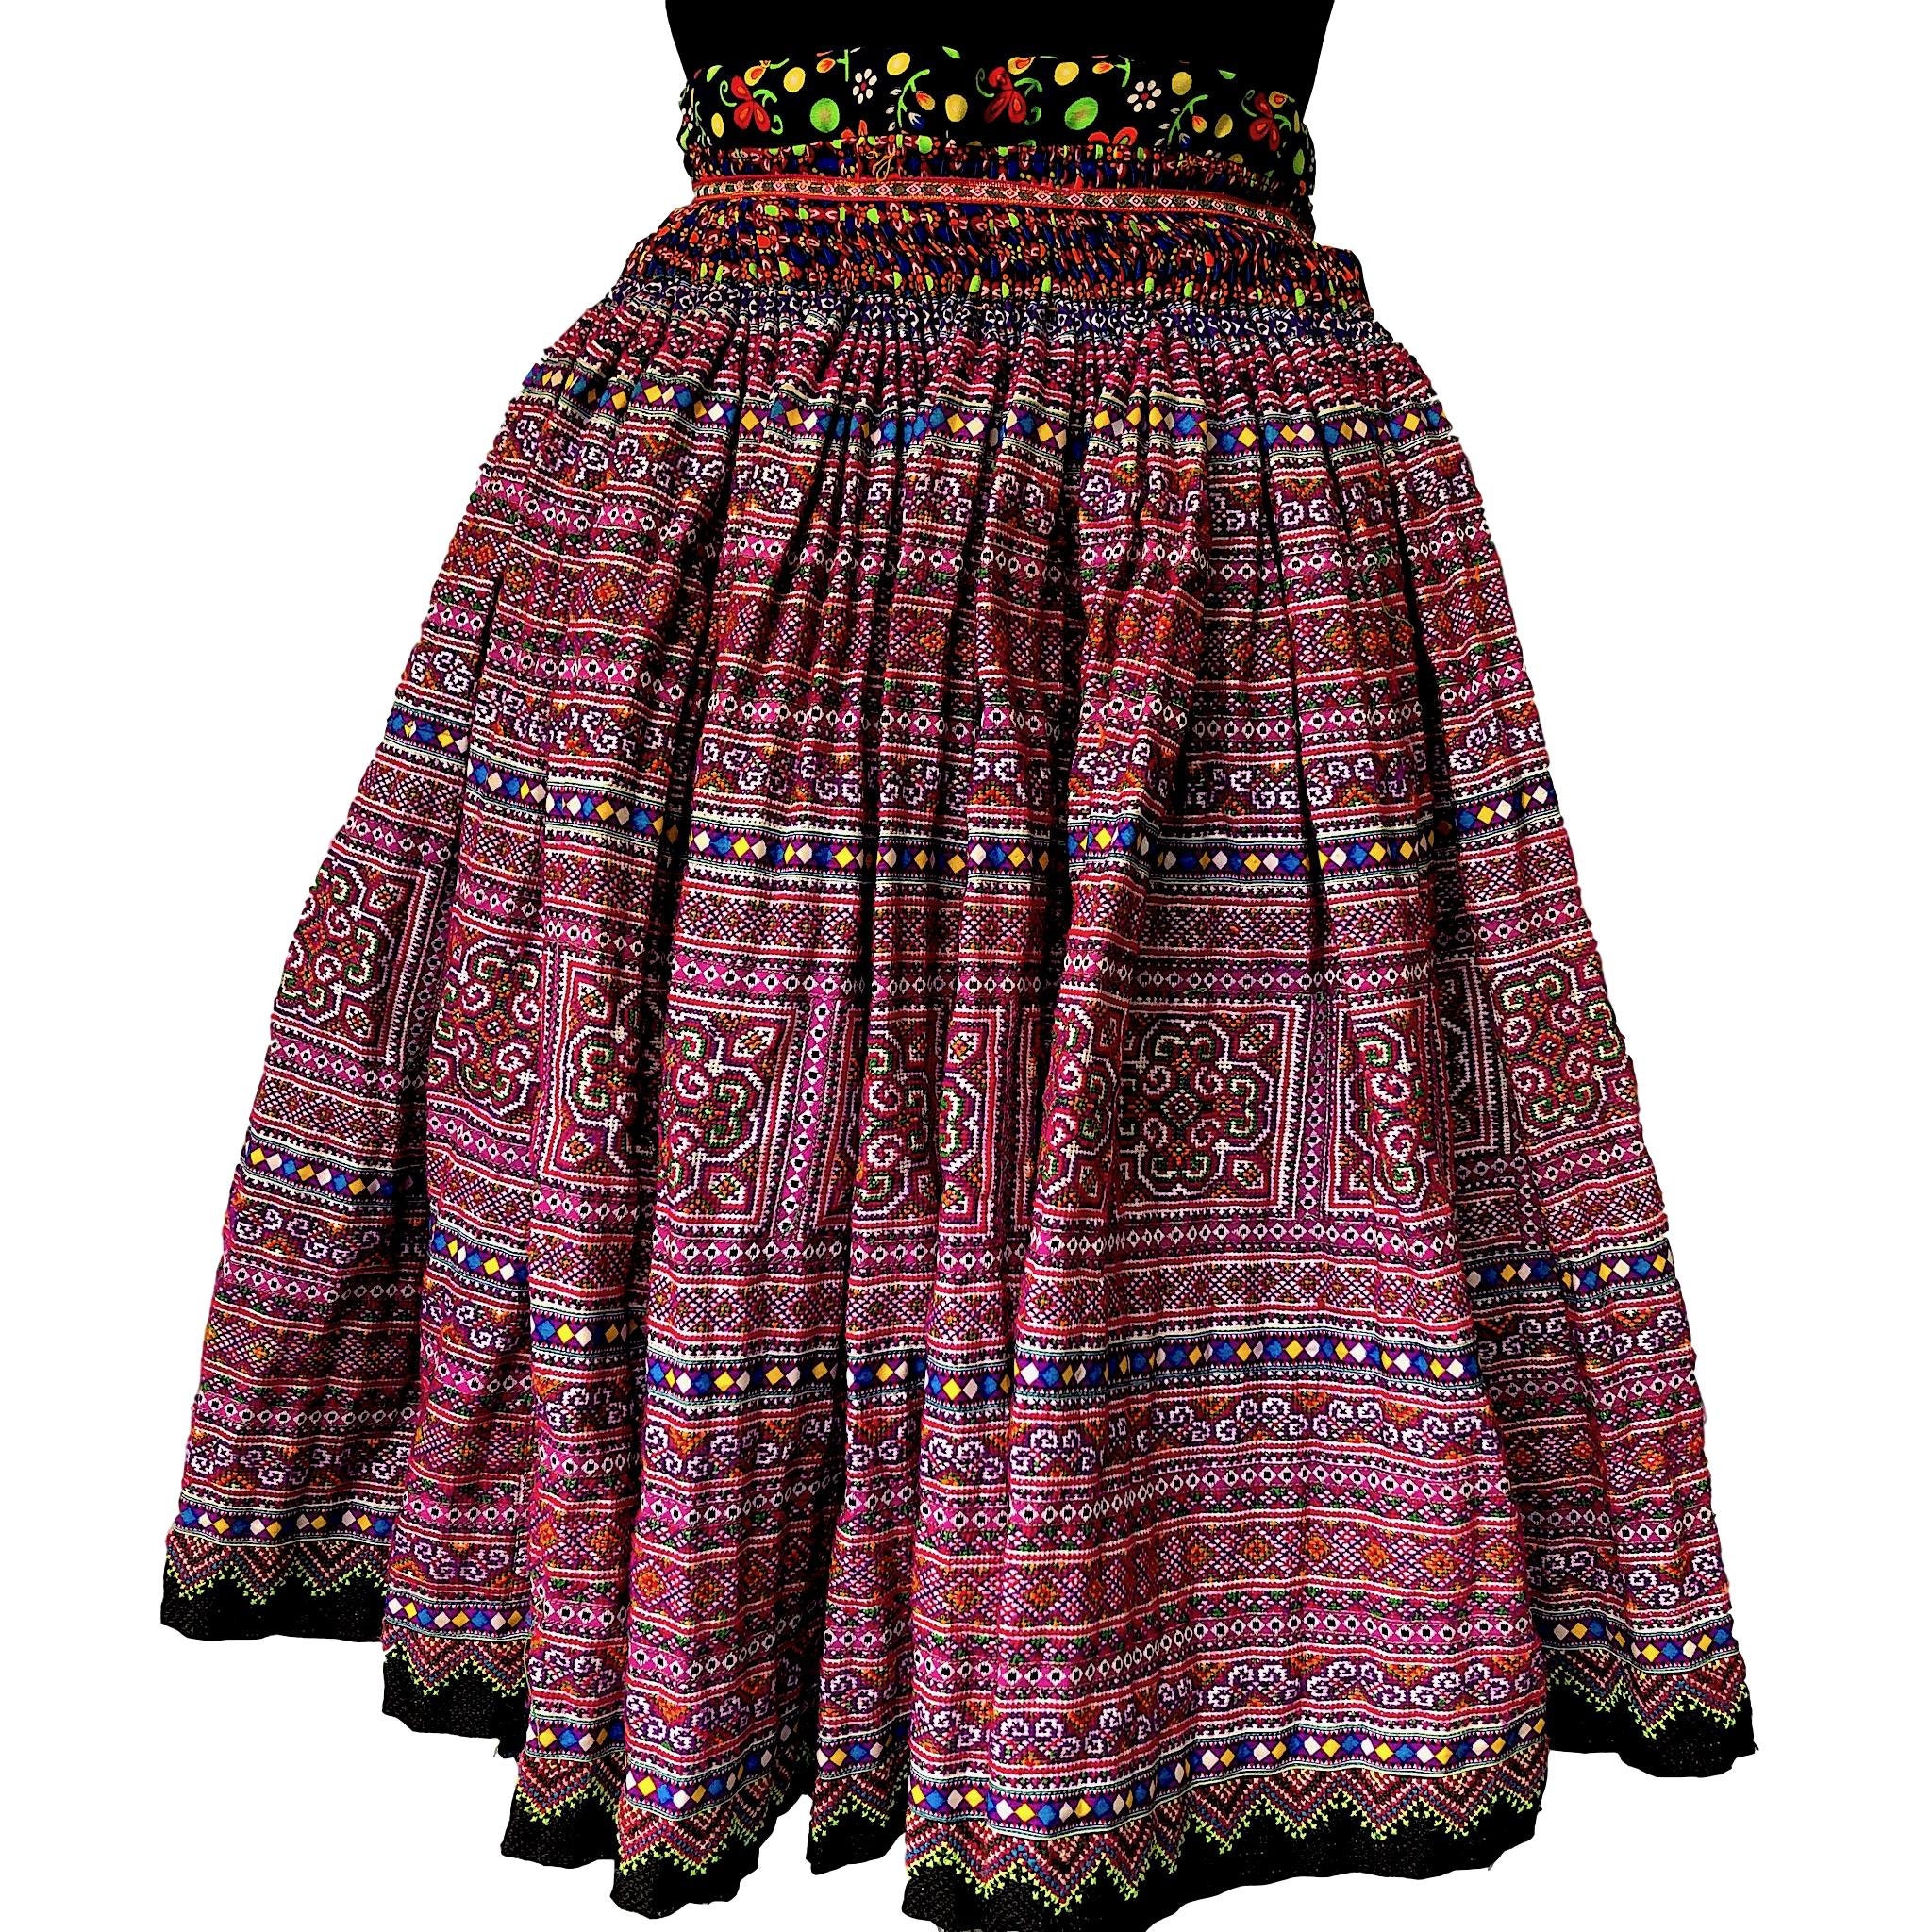 Hmong fabric skirt from Hill Tribe ready to wear or for | Etsy